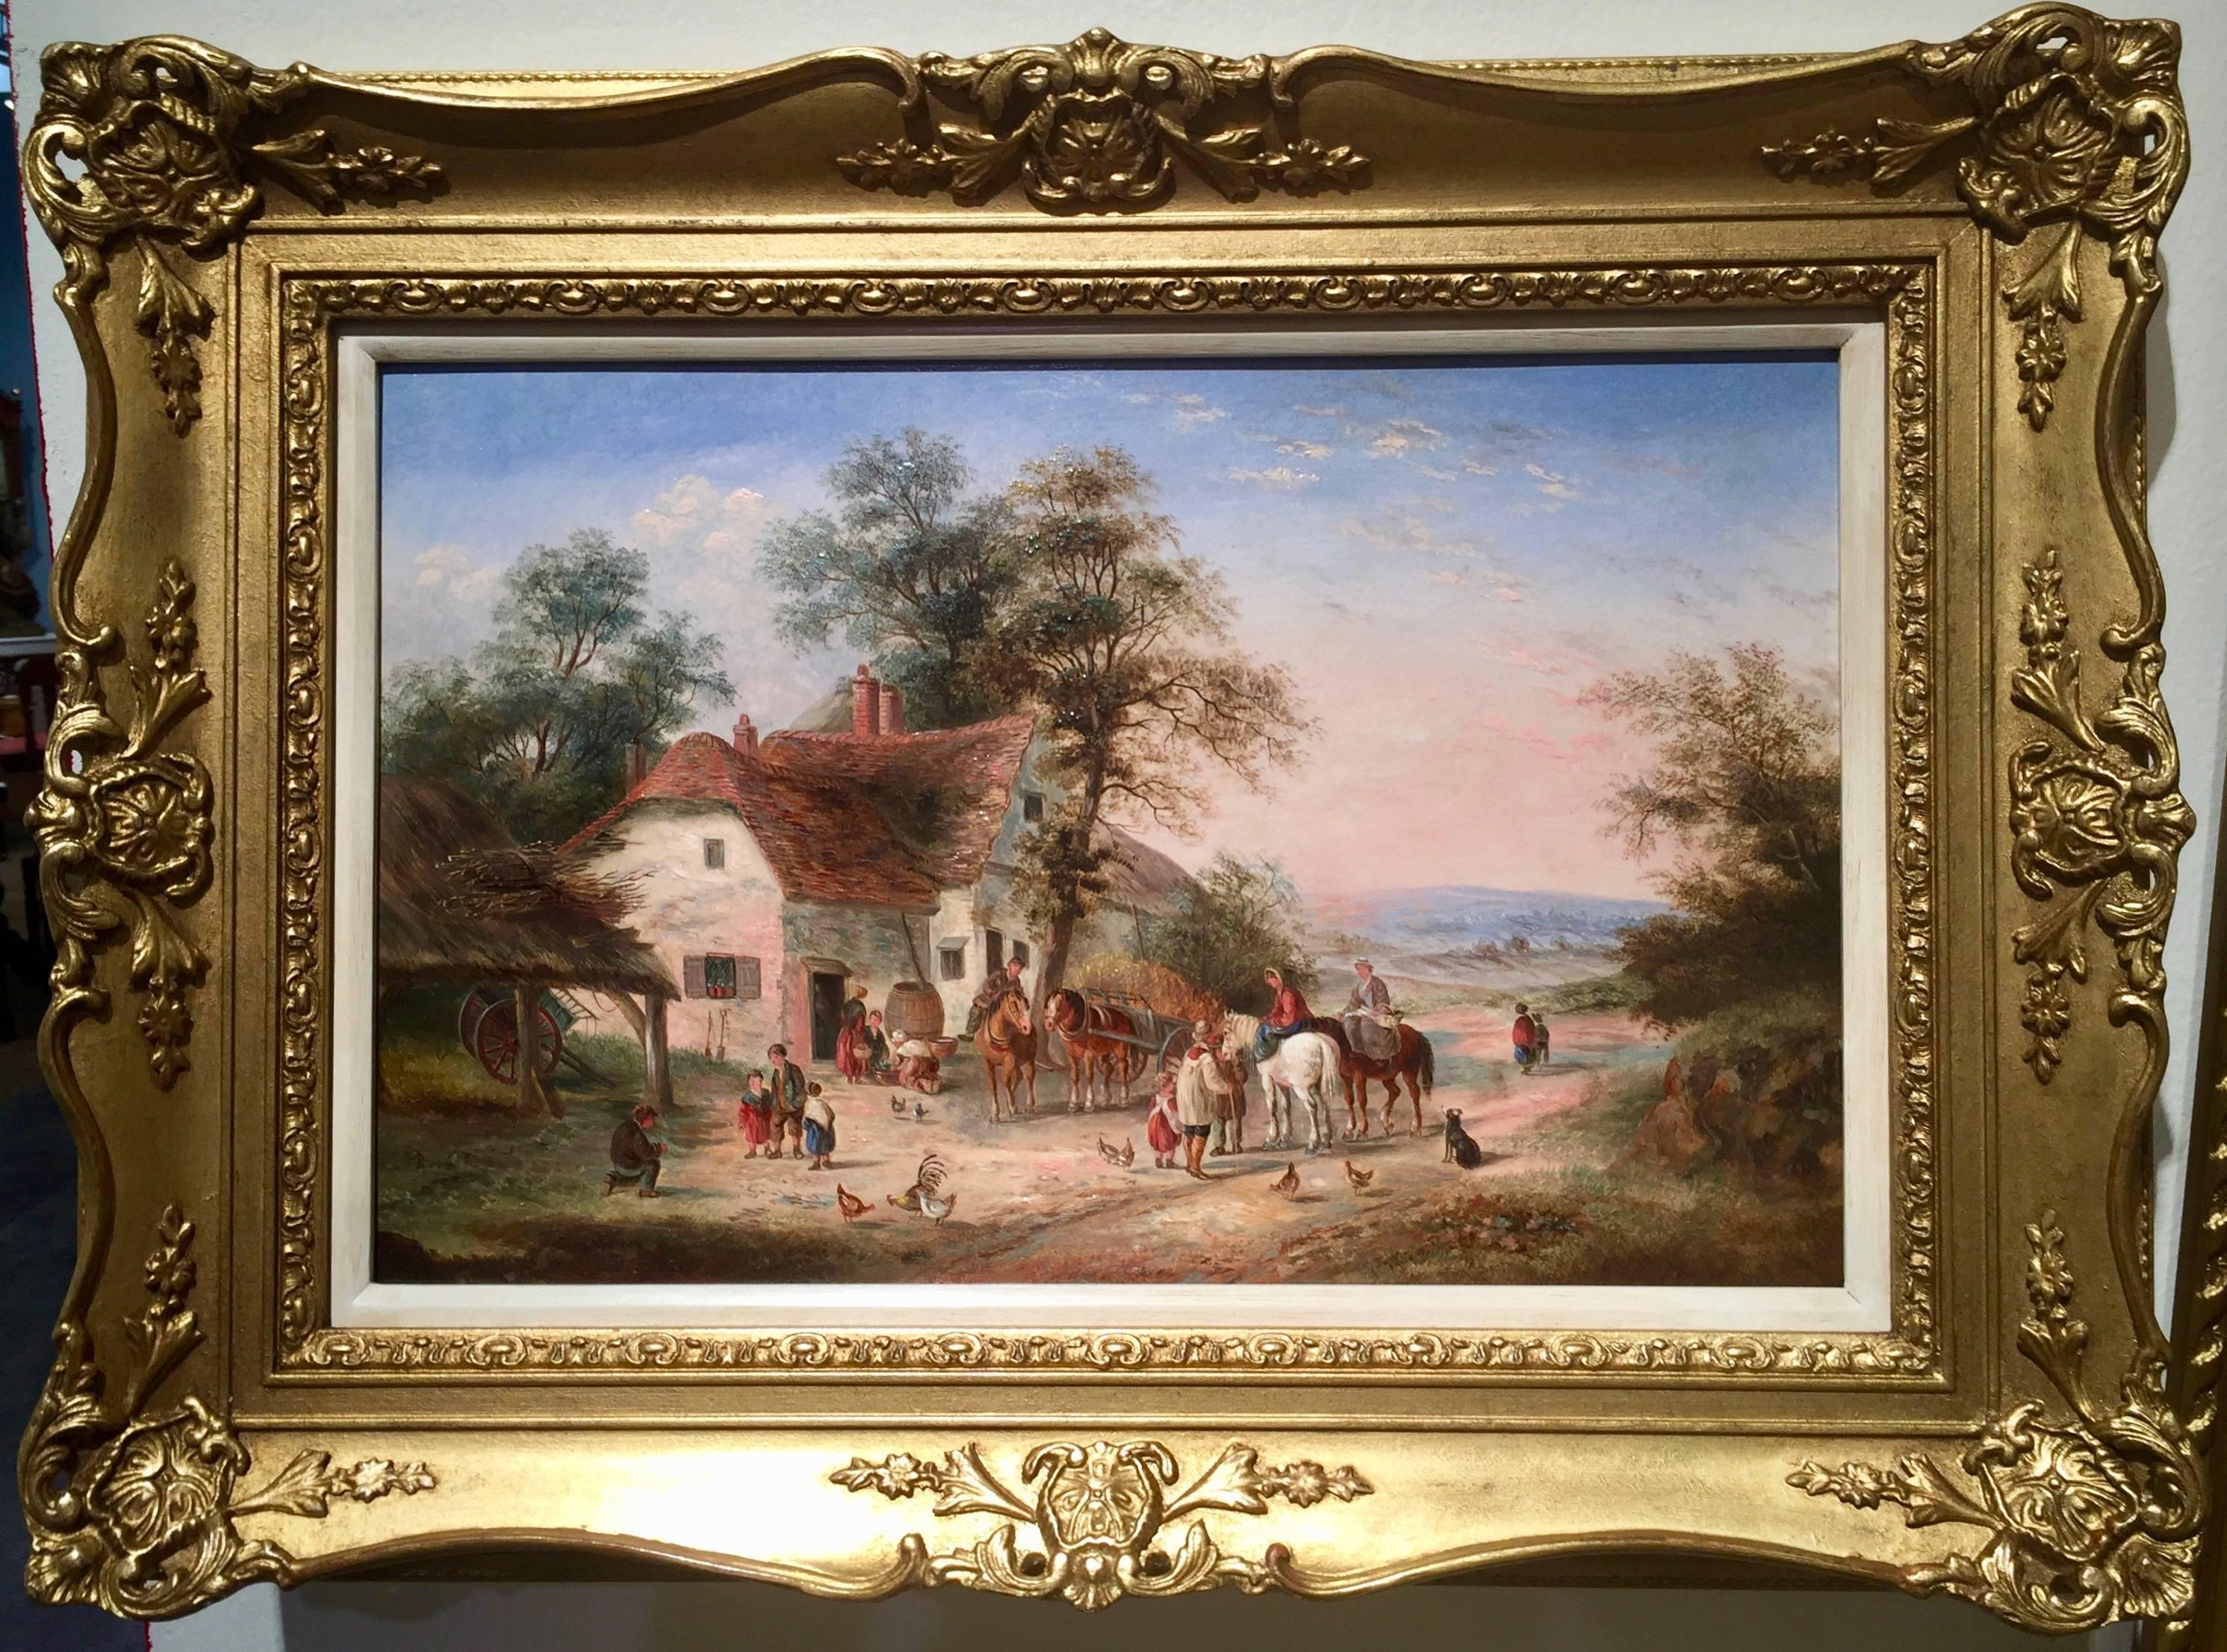 Georgina Lara Landscape Painting - English Village life with horses, chickens, dogs and people